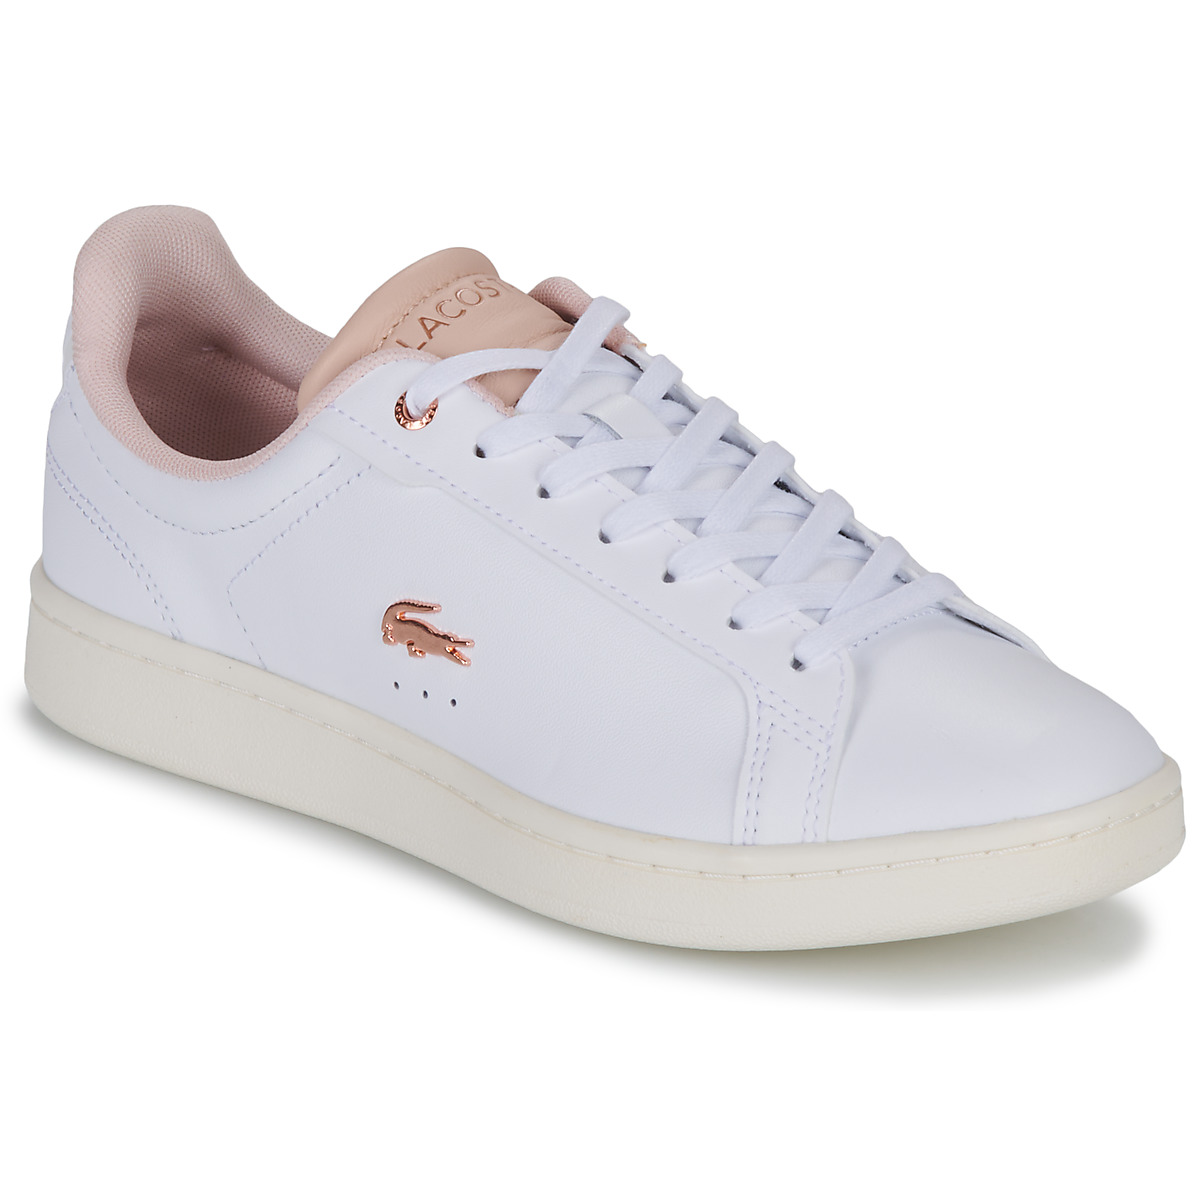 Lacoste Carnaby Pro White